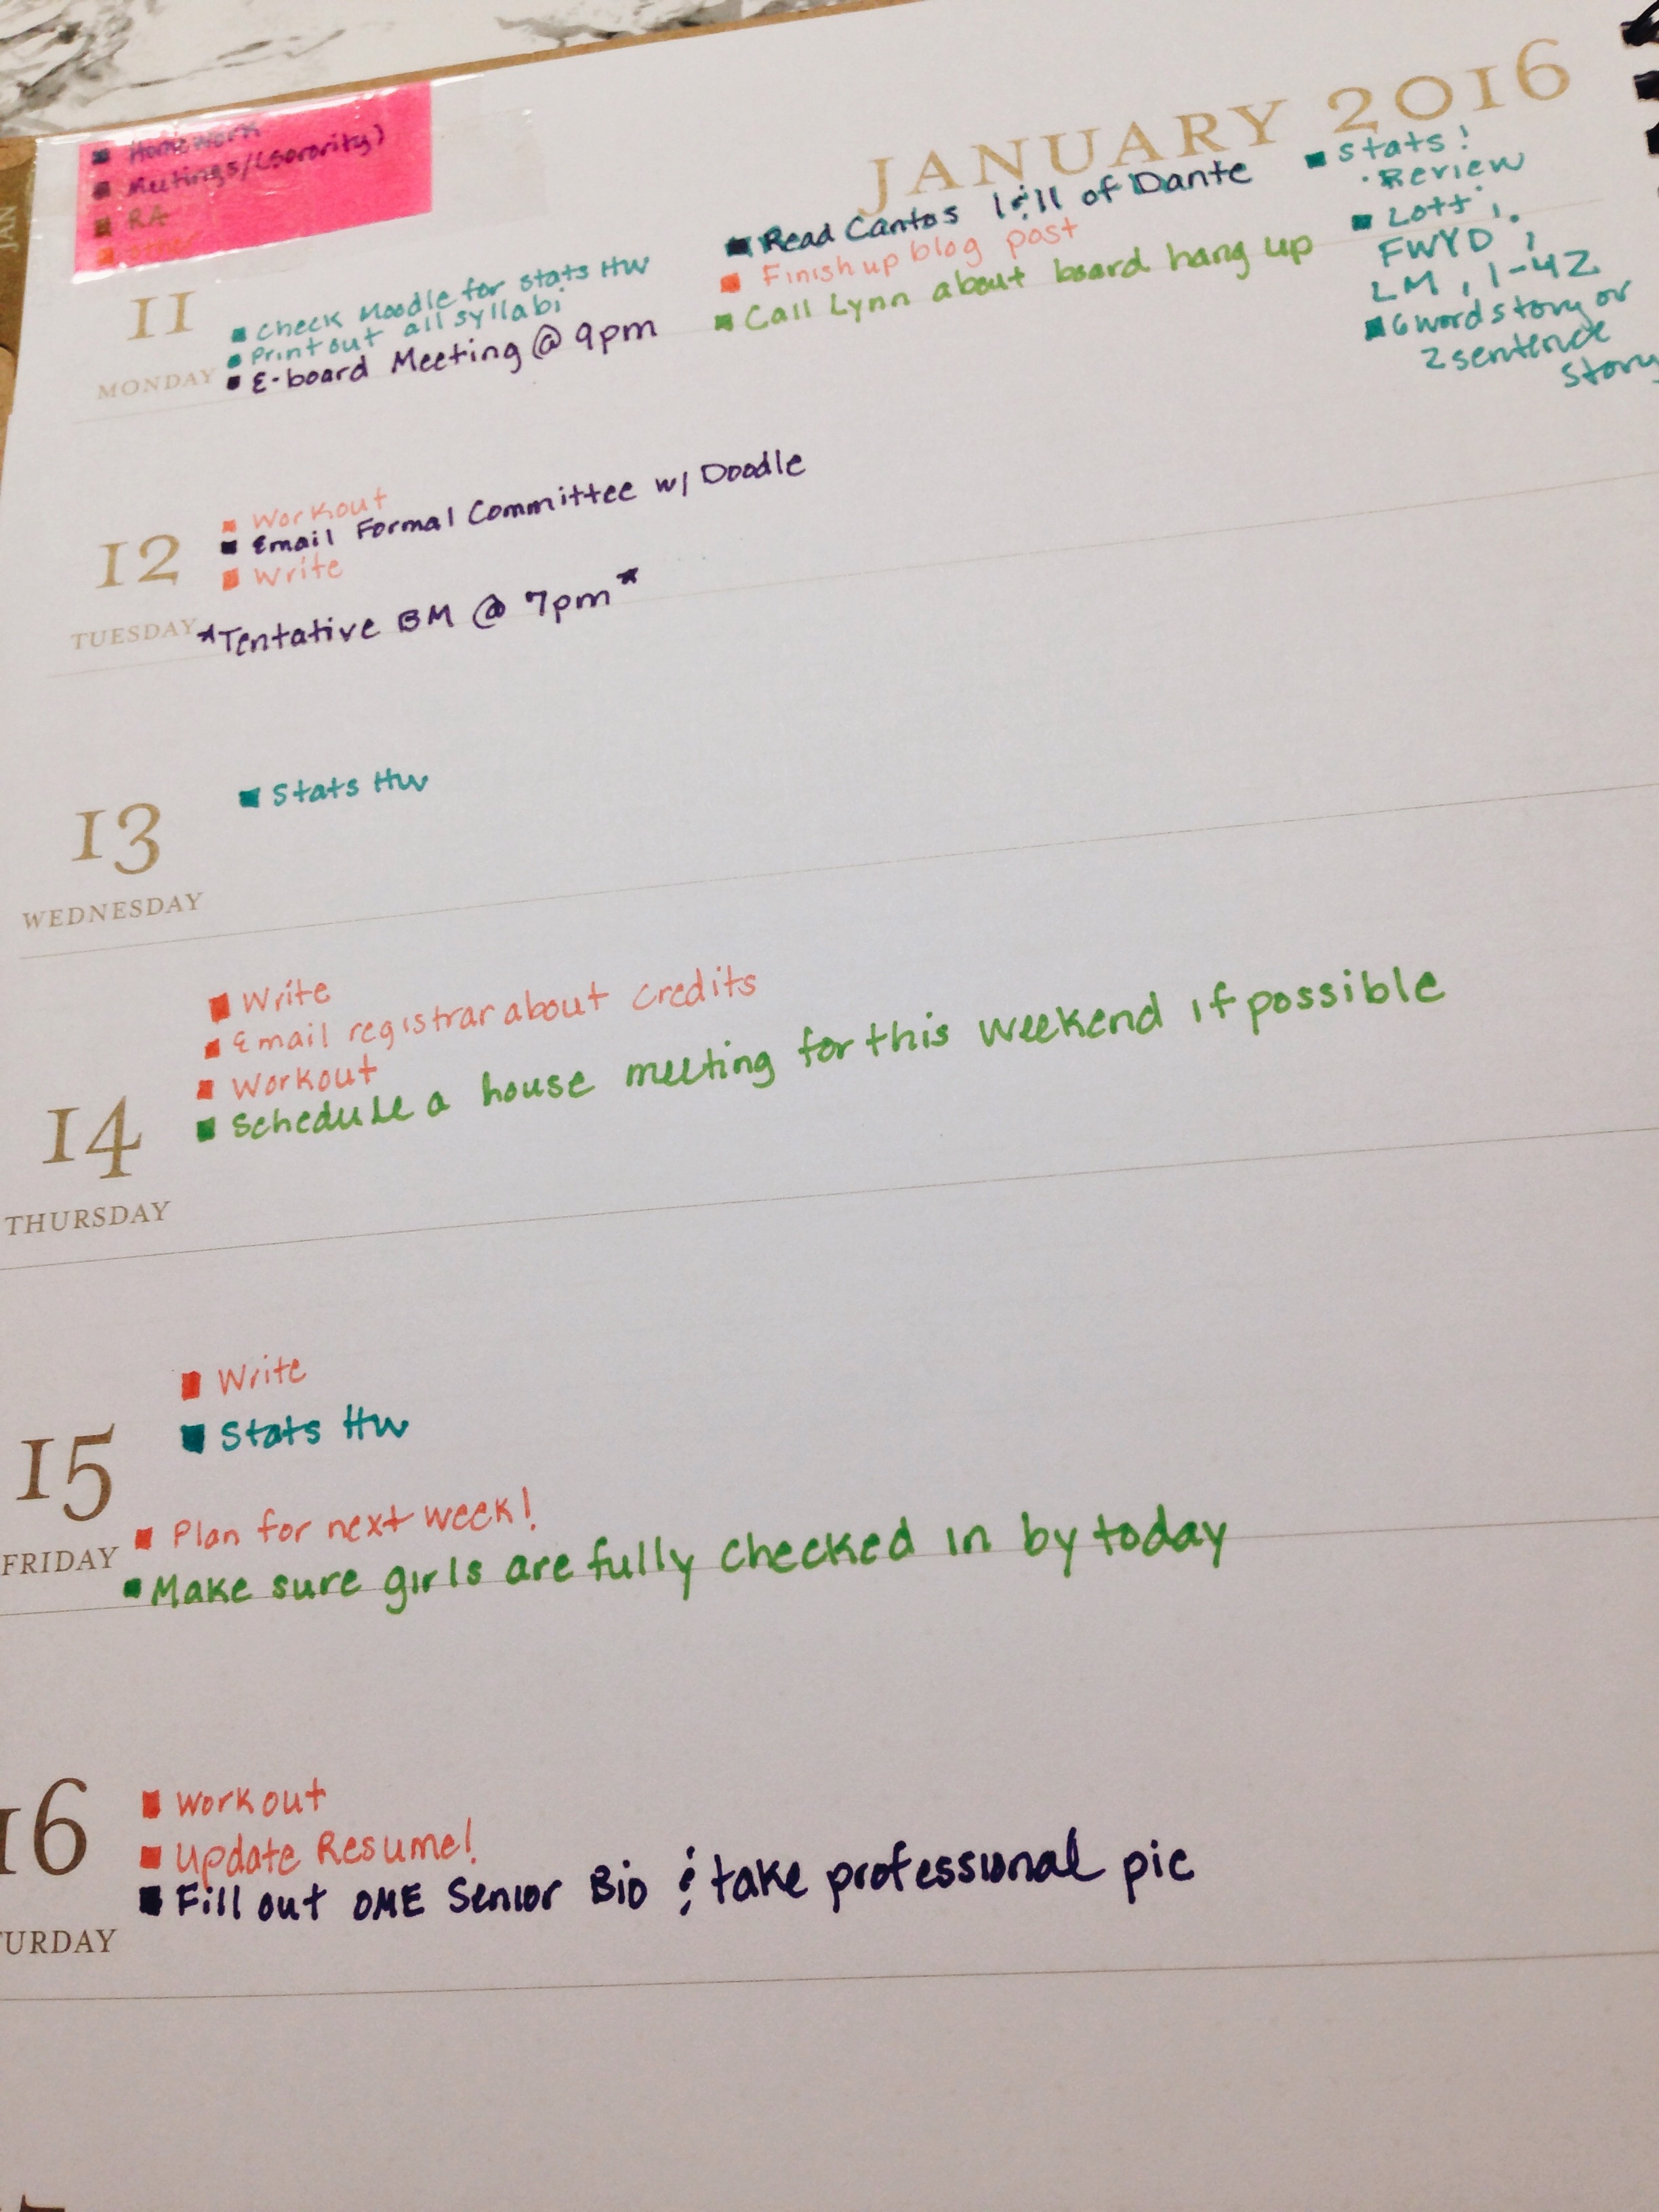 My week all organized in my planner by my color coding system!